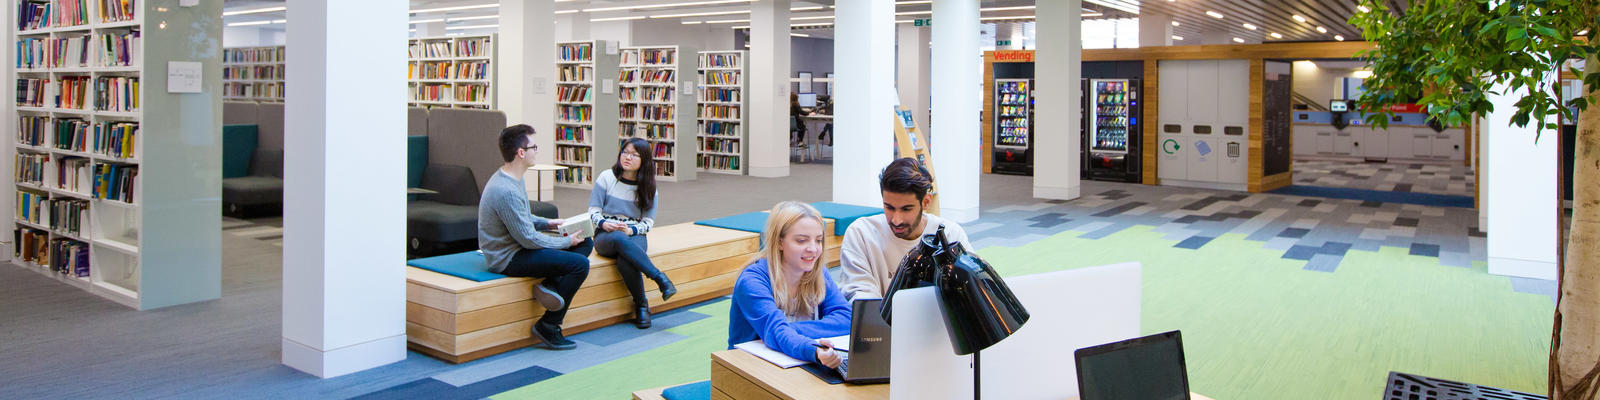 Library interior with students studying